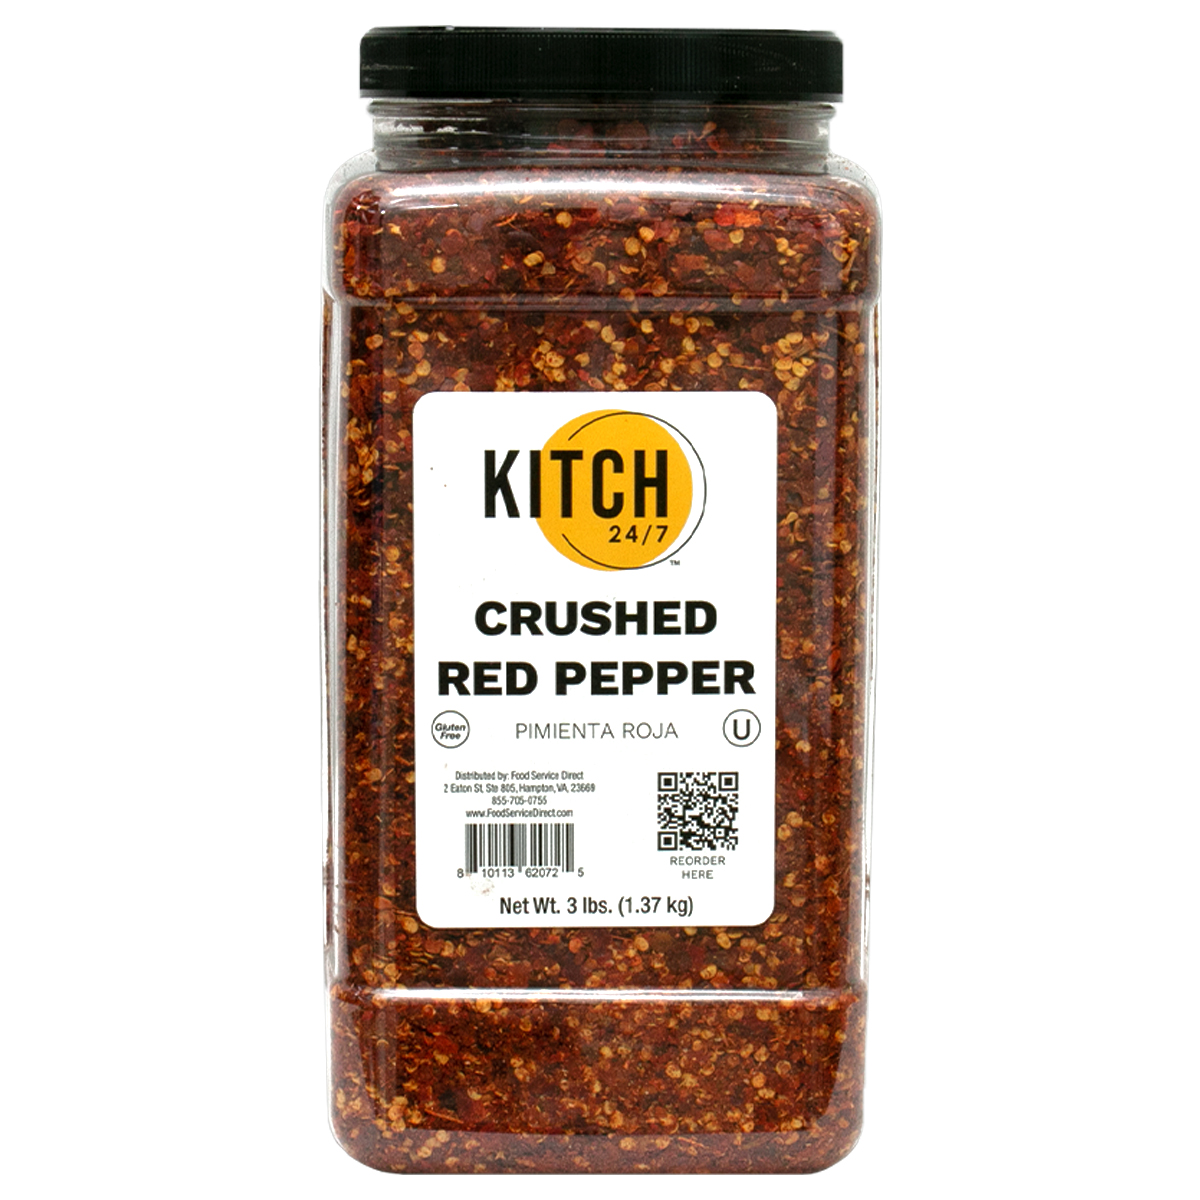 KITCH 24/7 Crushed Red Pepper, 3 Pound